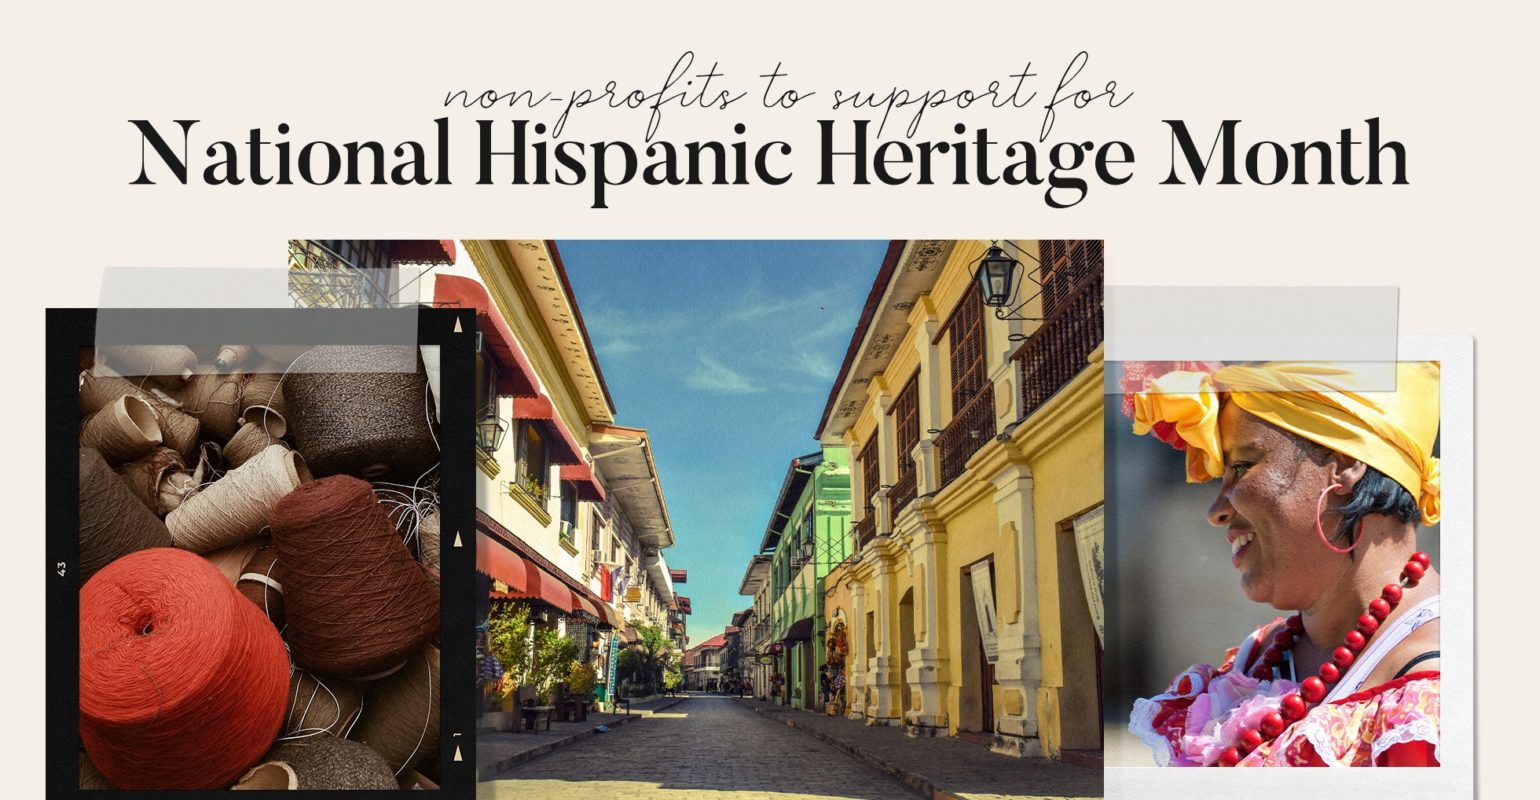 7 Nonprofits to Support Now for Hispanic Heritage Month